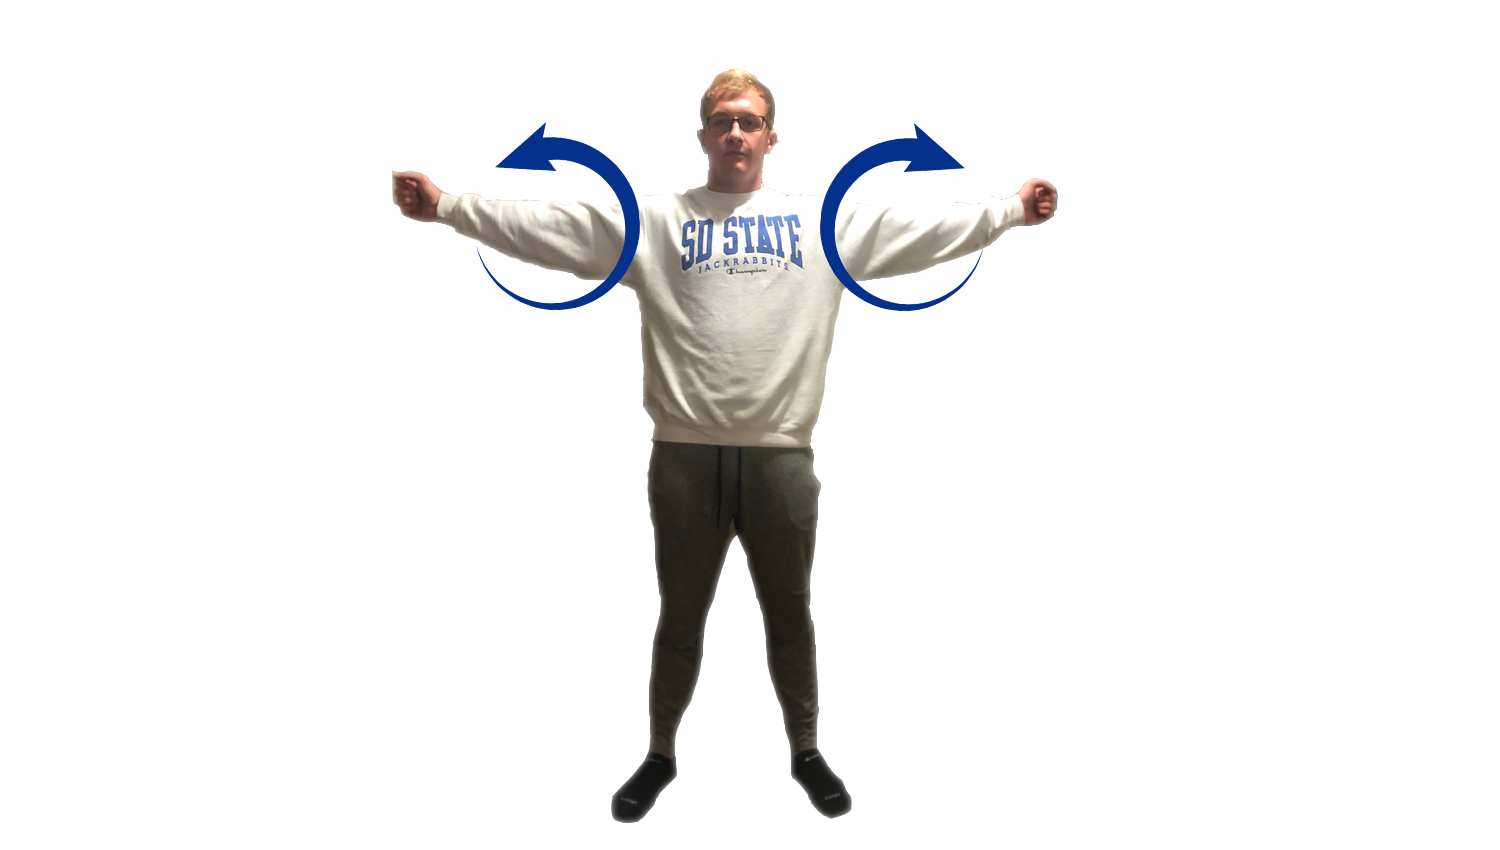 Young man demonstrating the shoulder circles exercise. For a complete description, call SDSU Extension at 605-688-4792.